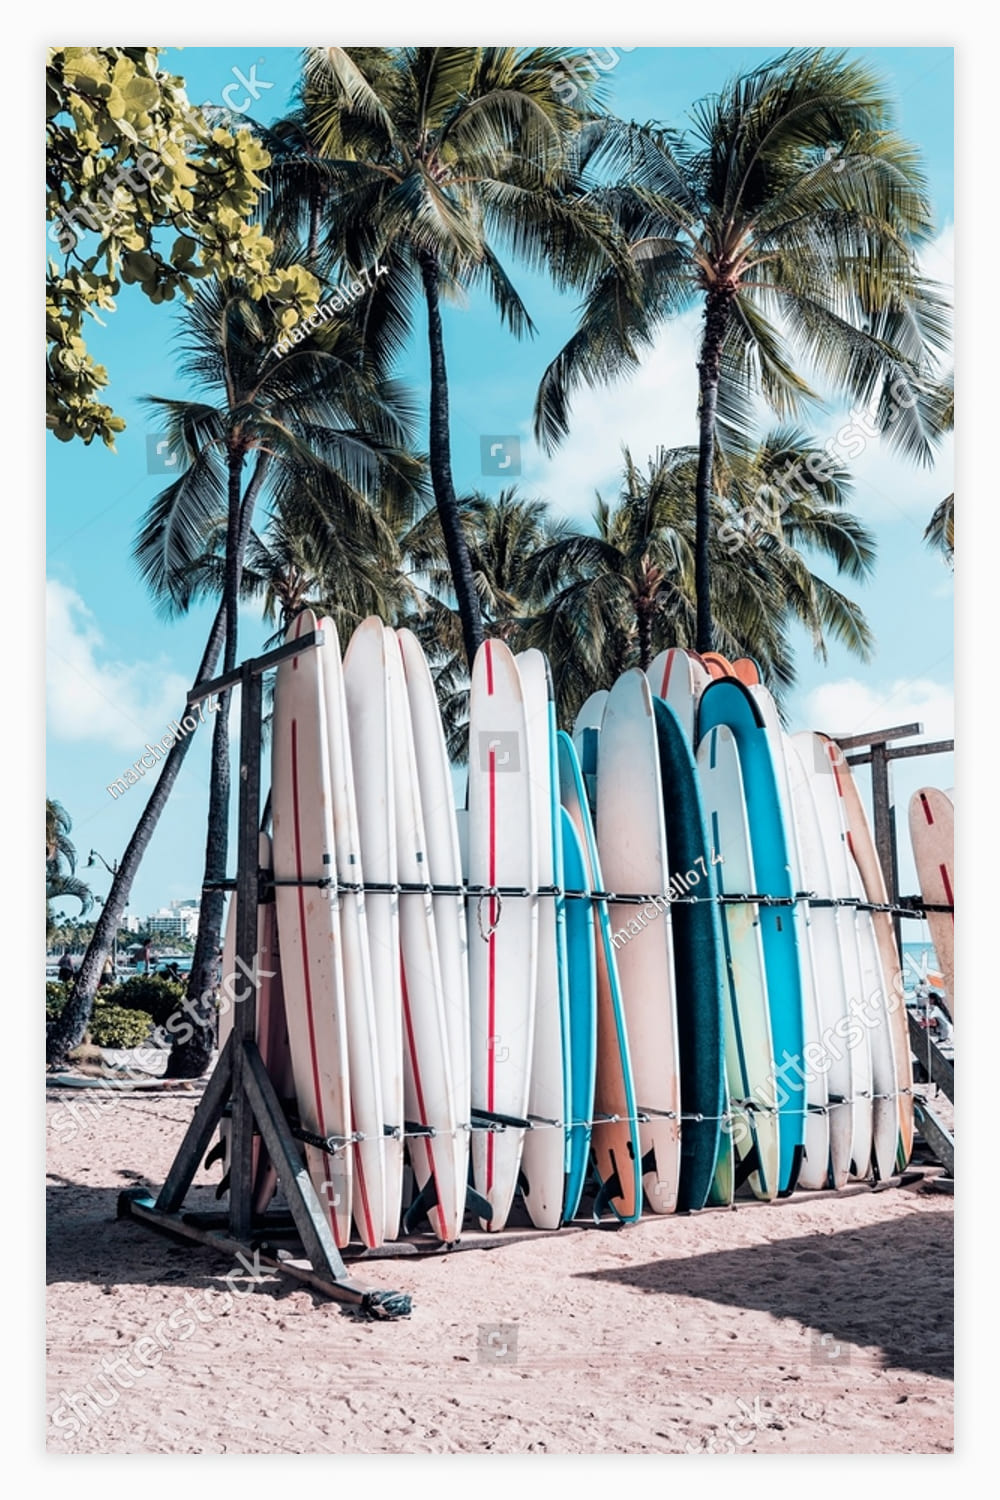 Surfboards in the rack on sandy beach with palm trees and ocean at famous Waikiki Beach in Honolulu, Hawaii.